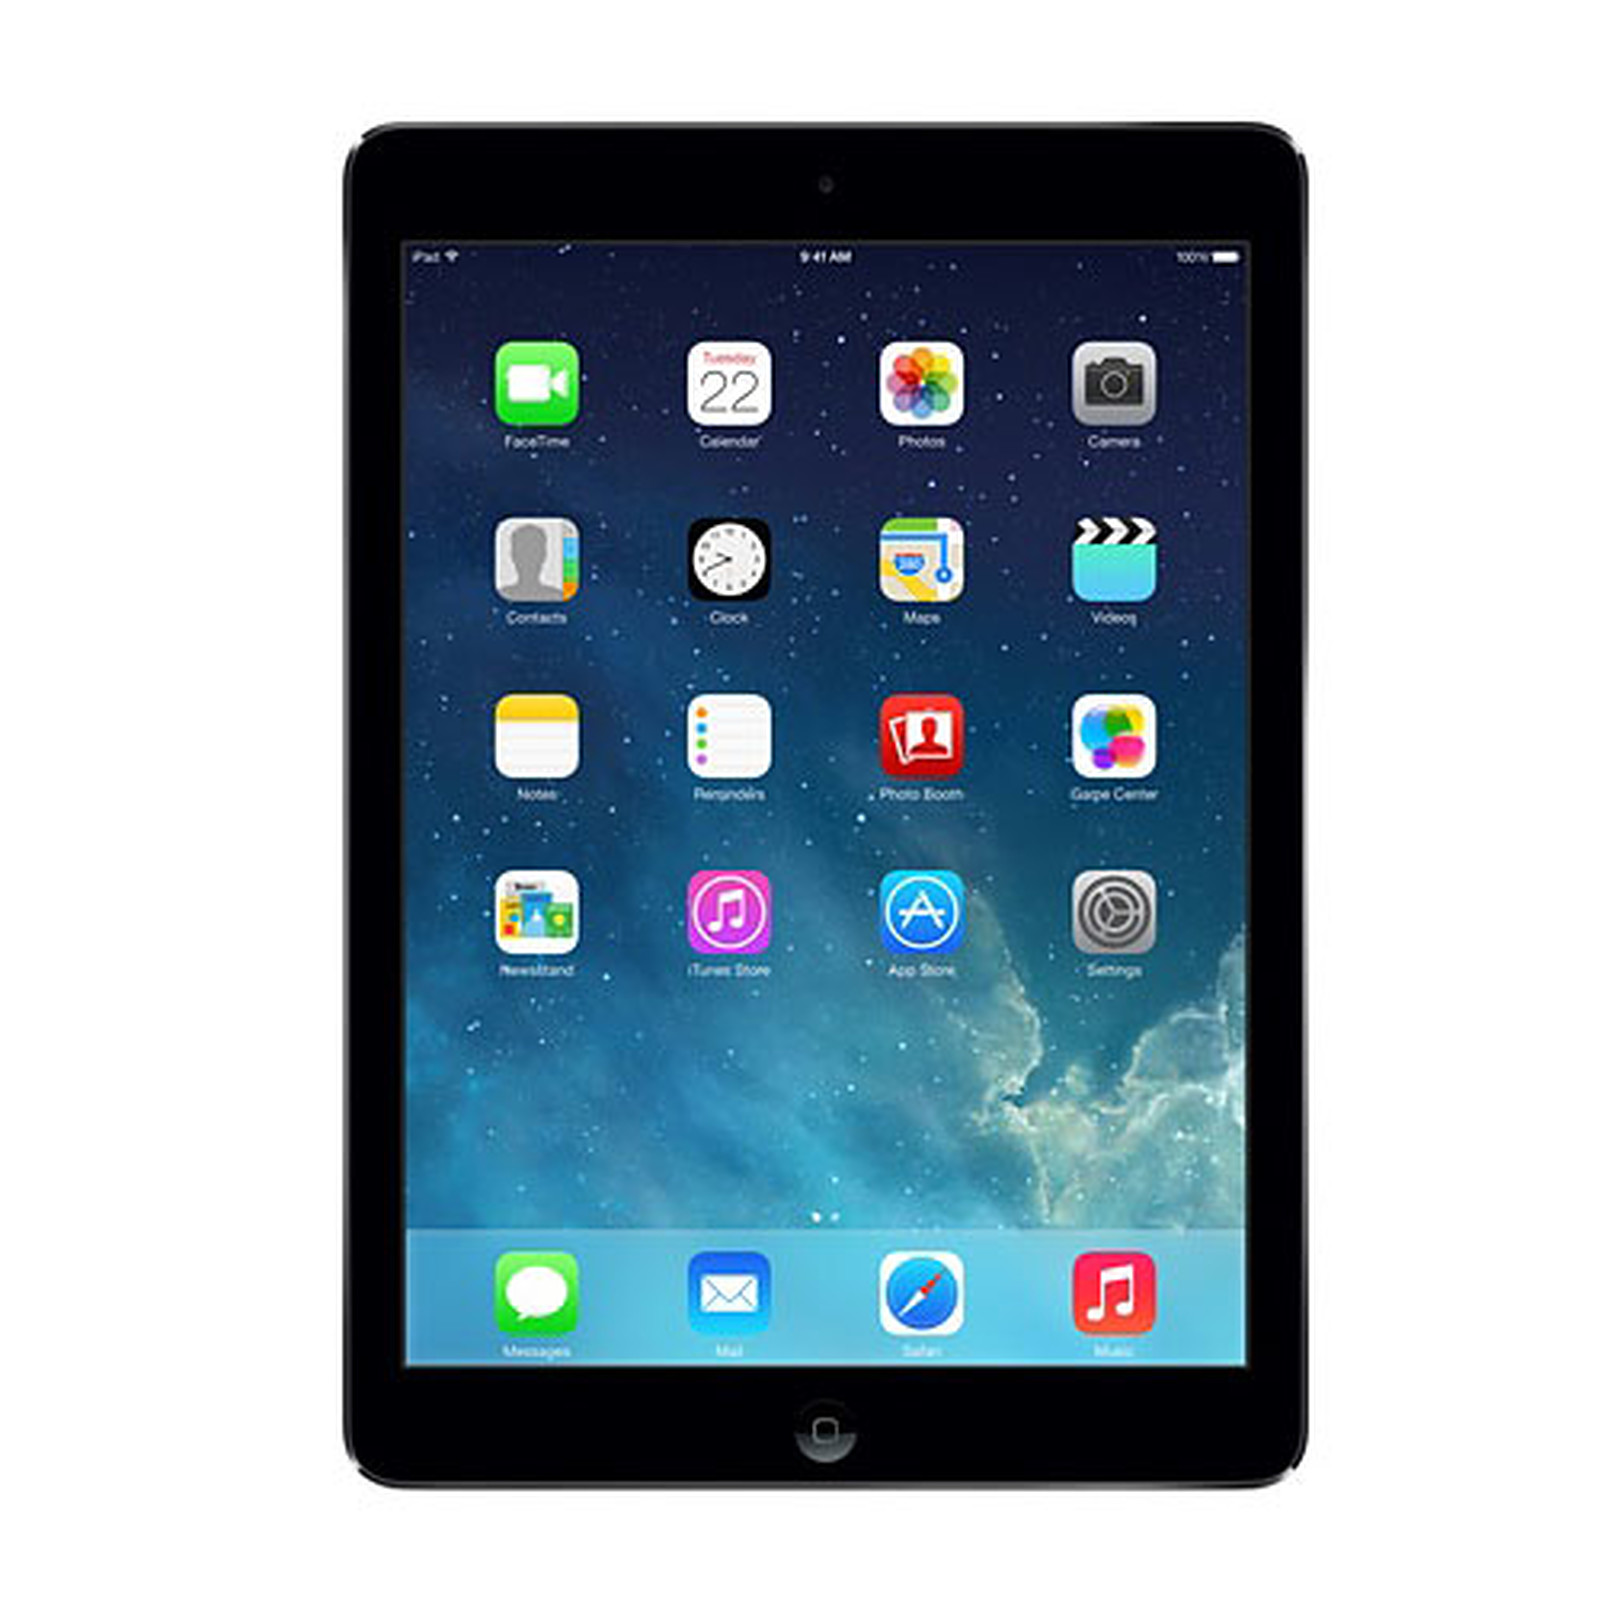 Apple iPad Air 32 Go Wi-Fi Gris Sideral · Reconditionne - Tablette tactile Apple